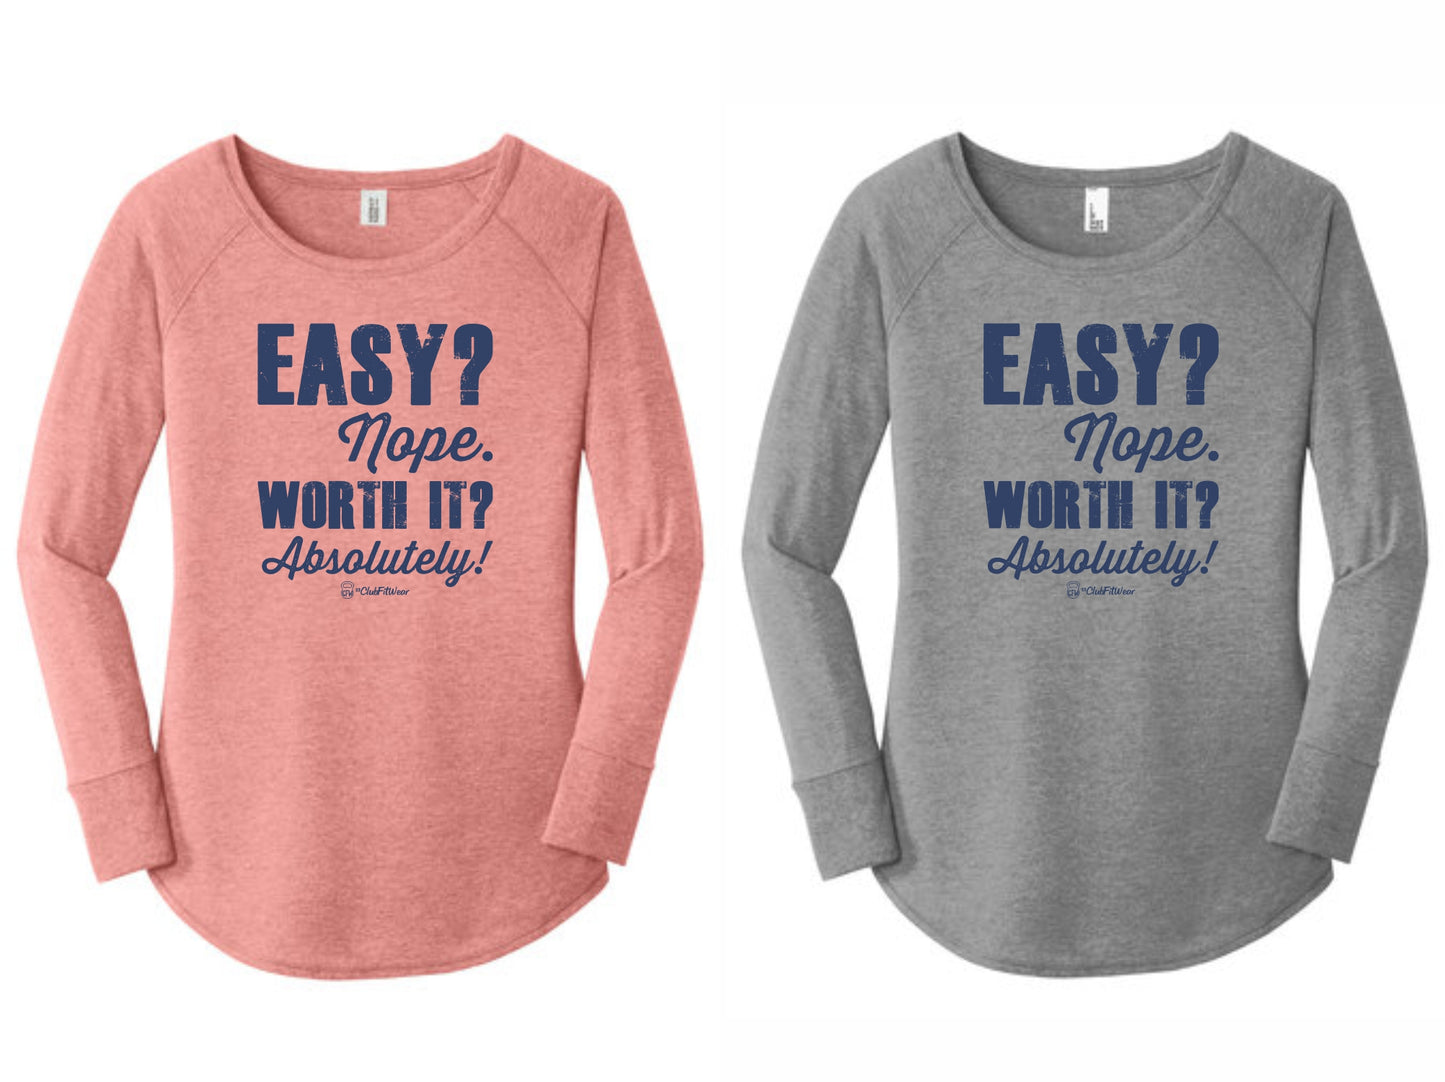 Easy? Nope. Worth it? Absolutely! - Long Sleeve Tunic